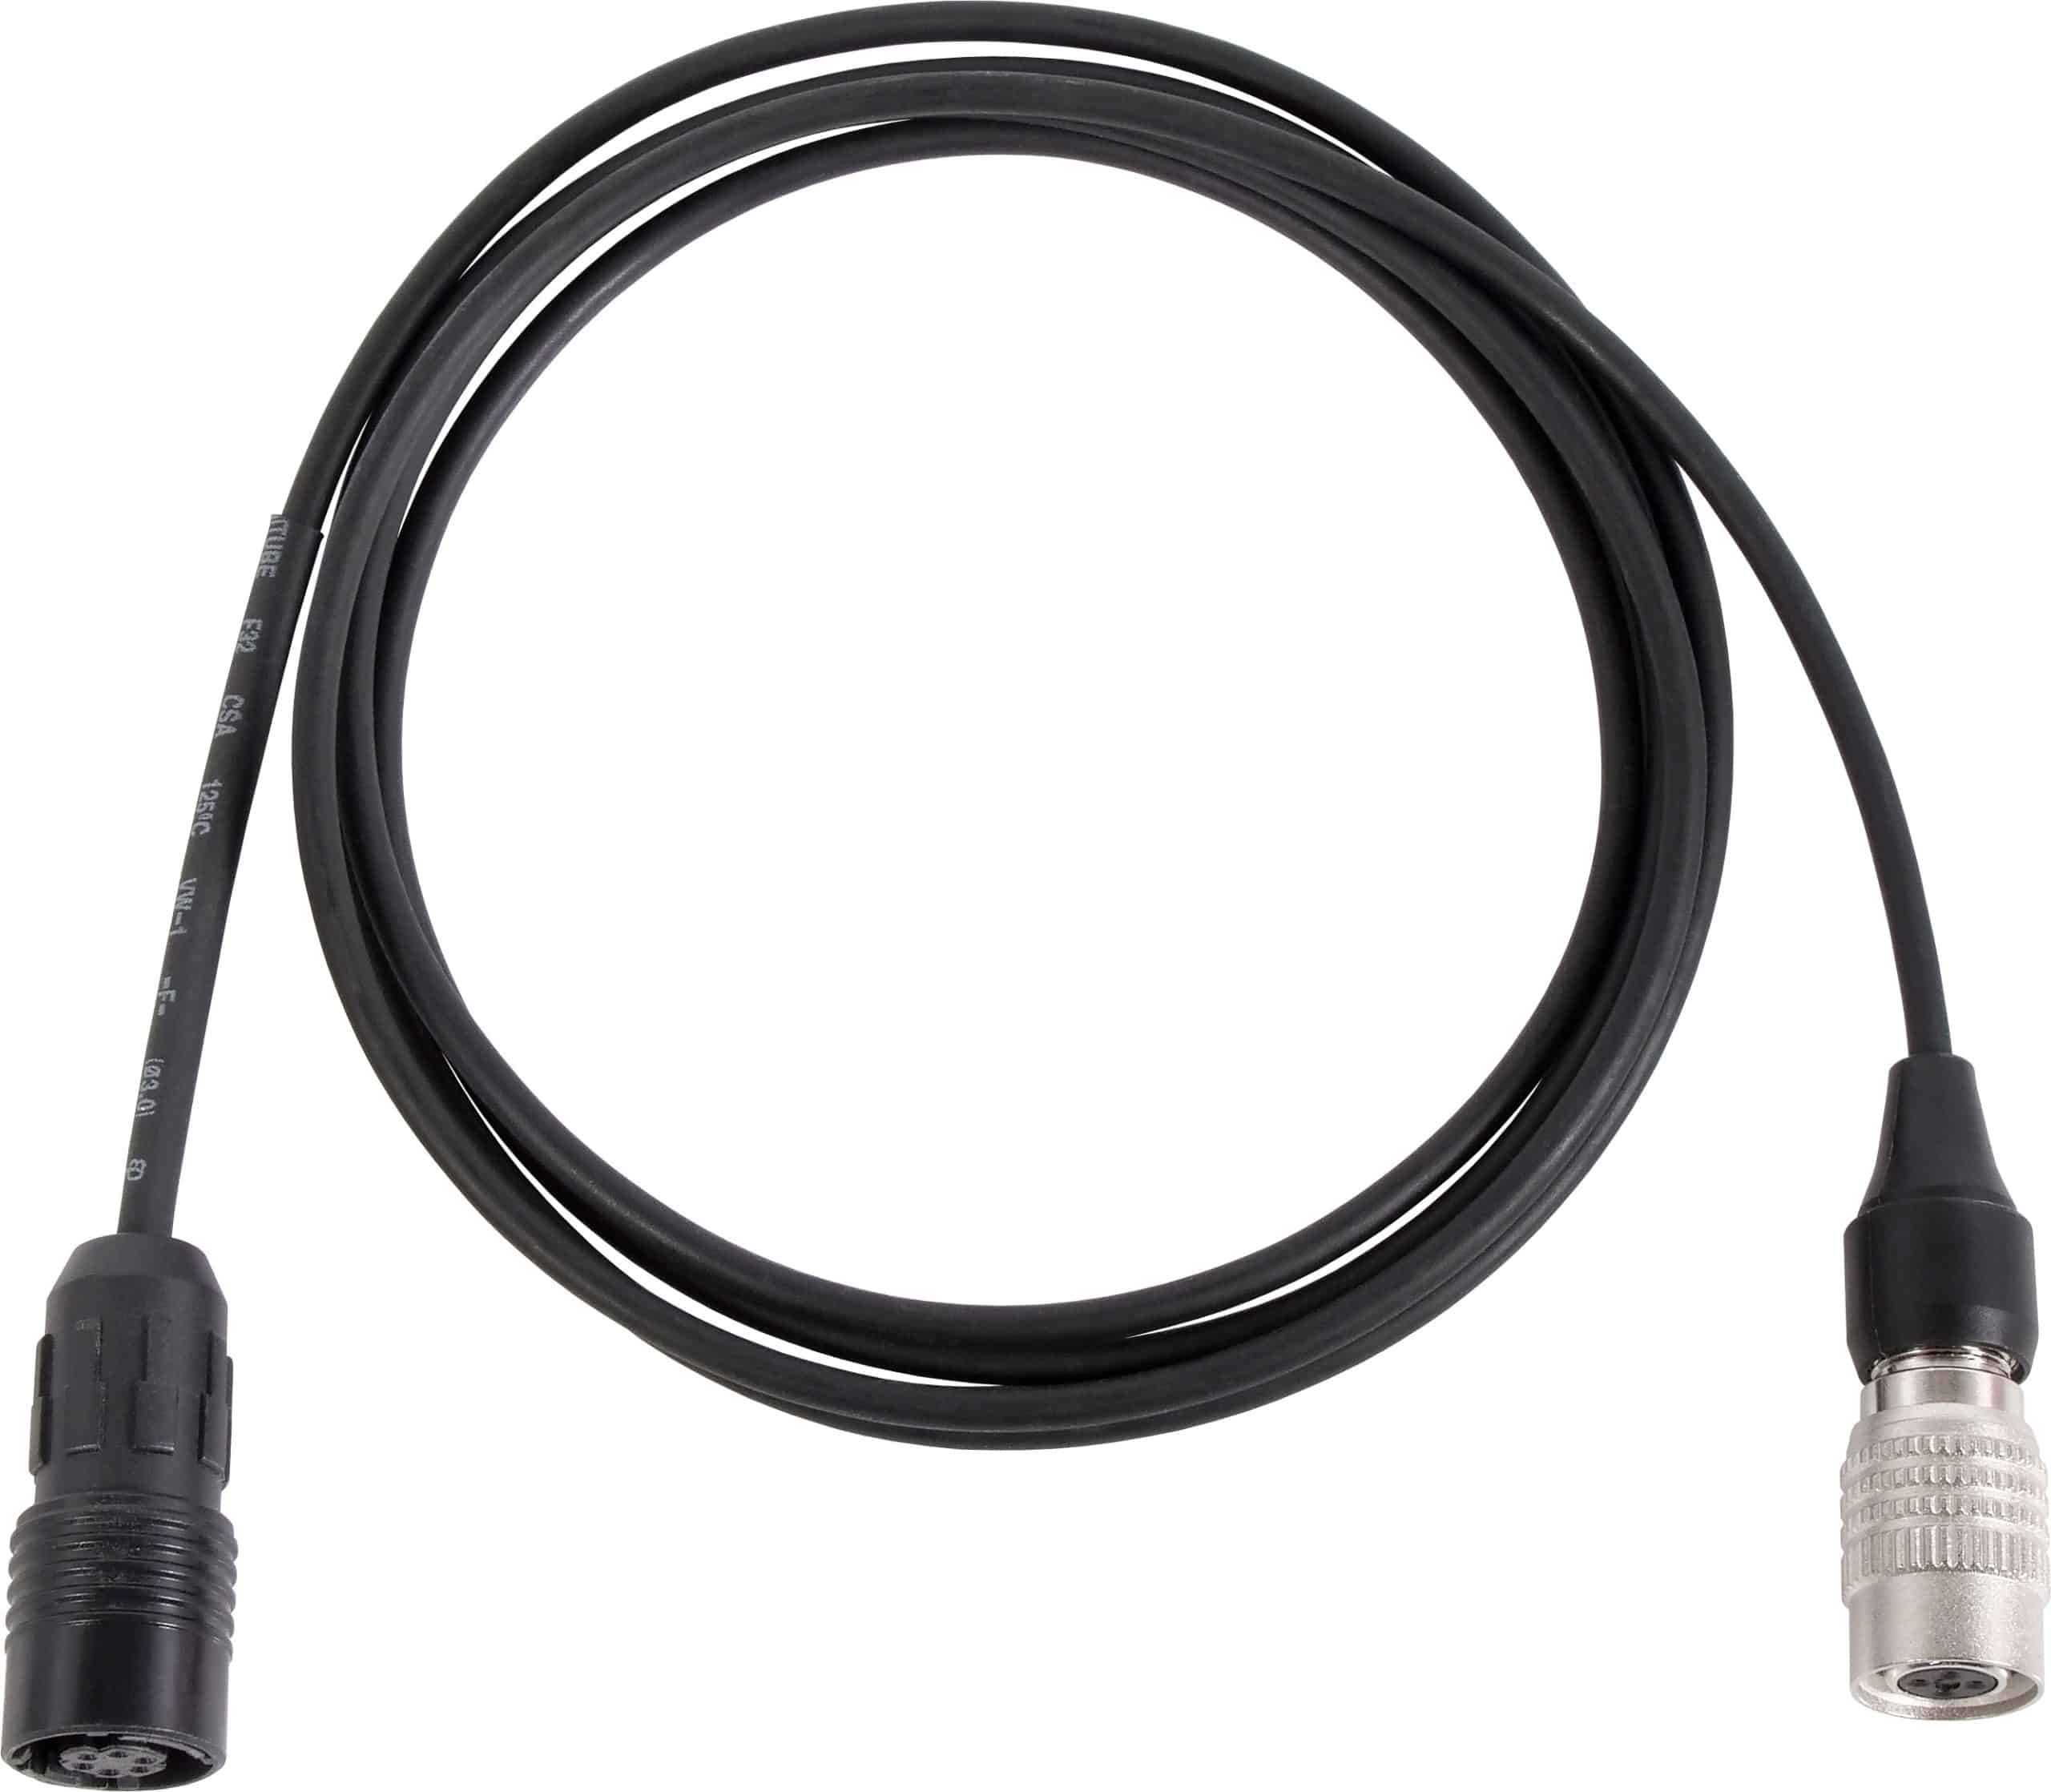 Replacement cable for H2O7 Wireless Headset Mic. The cable is wired to work with Audio-Technica® systems.